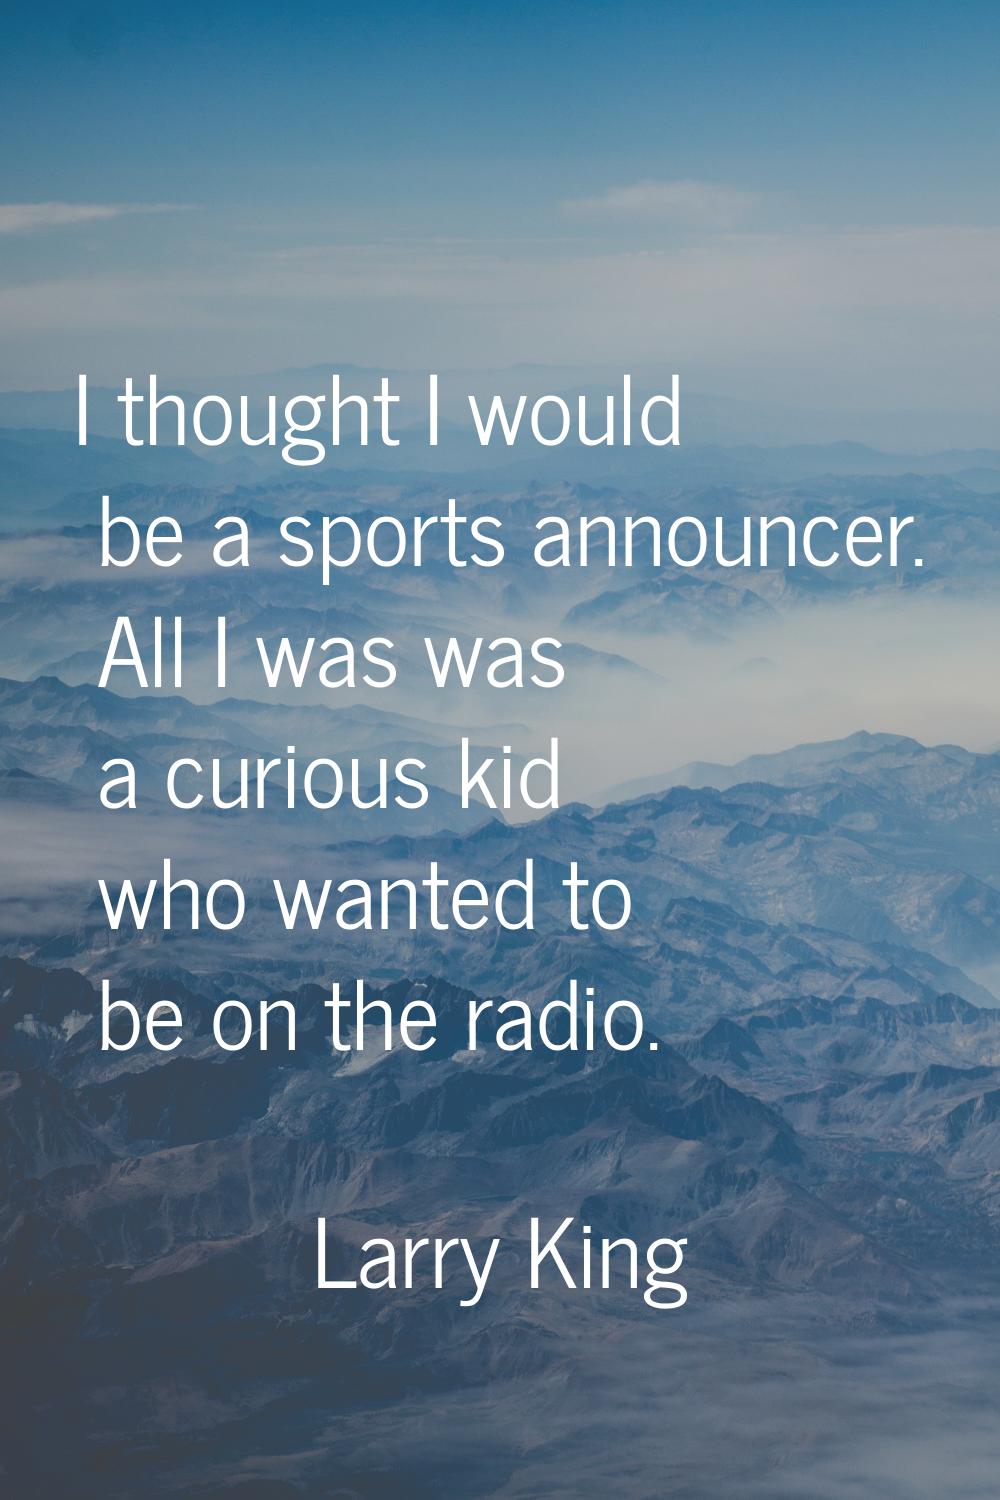 I thought I would be a sports announcer. All I was was a curious kid who wanted to be on the radio.